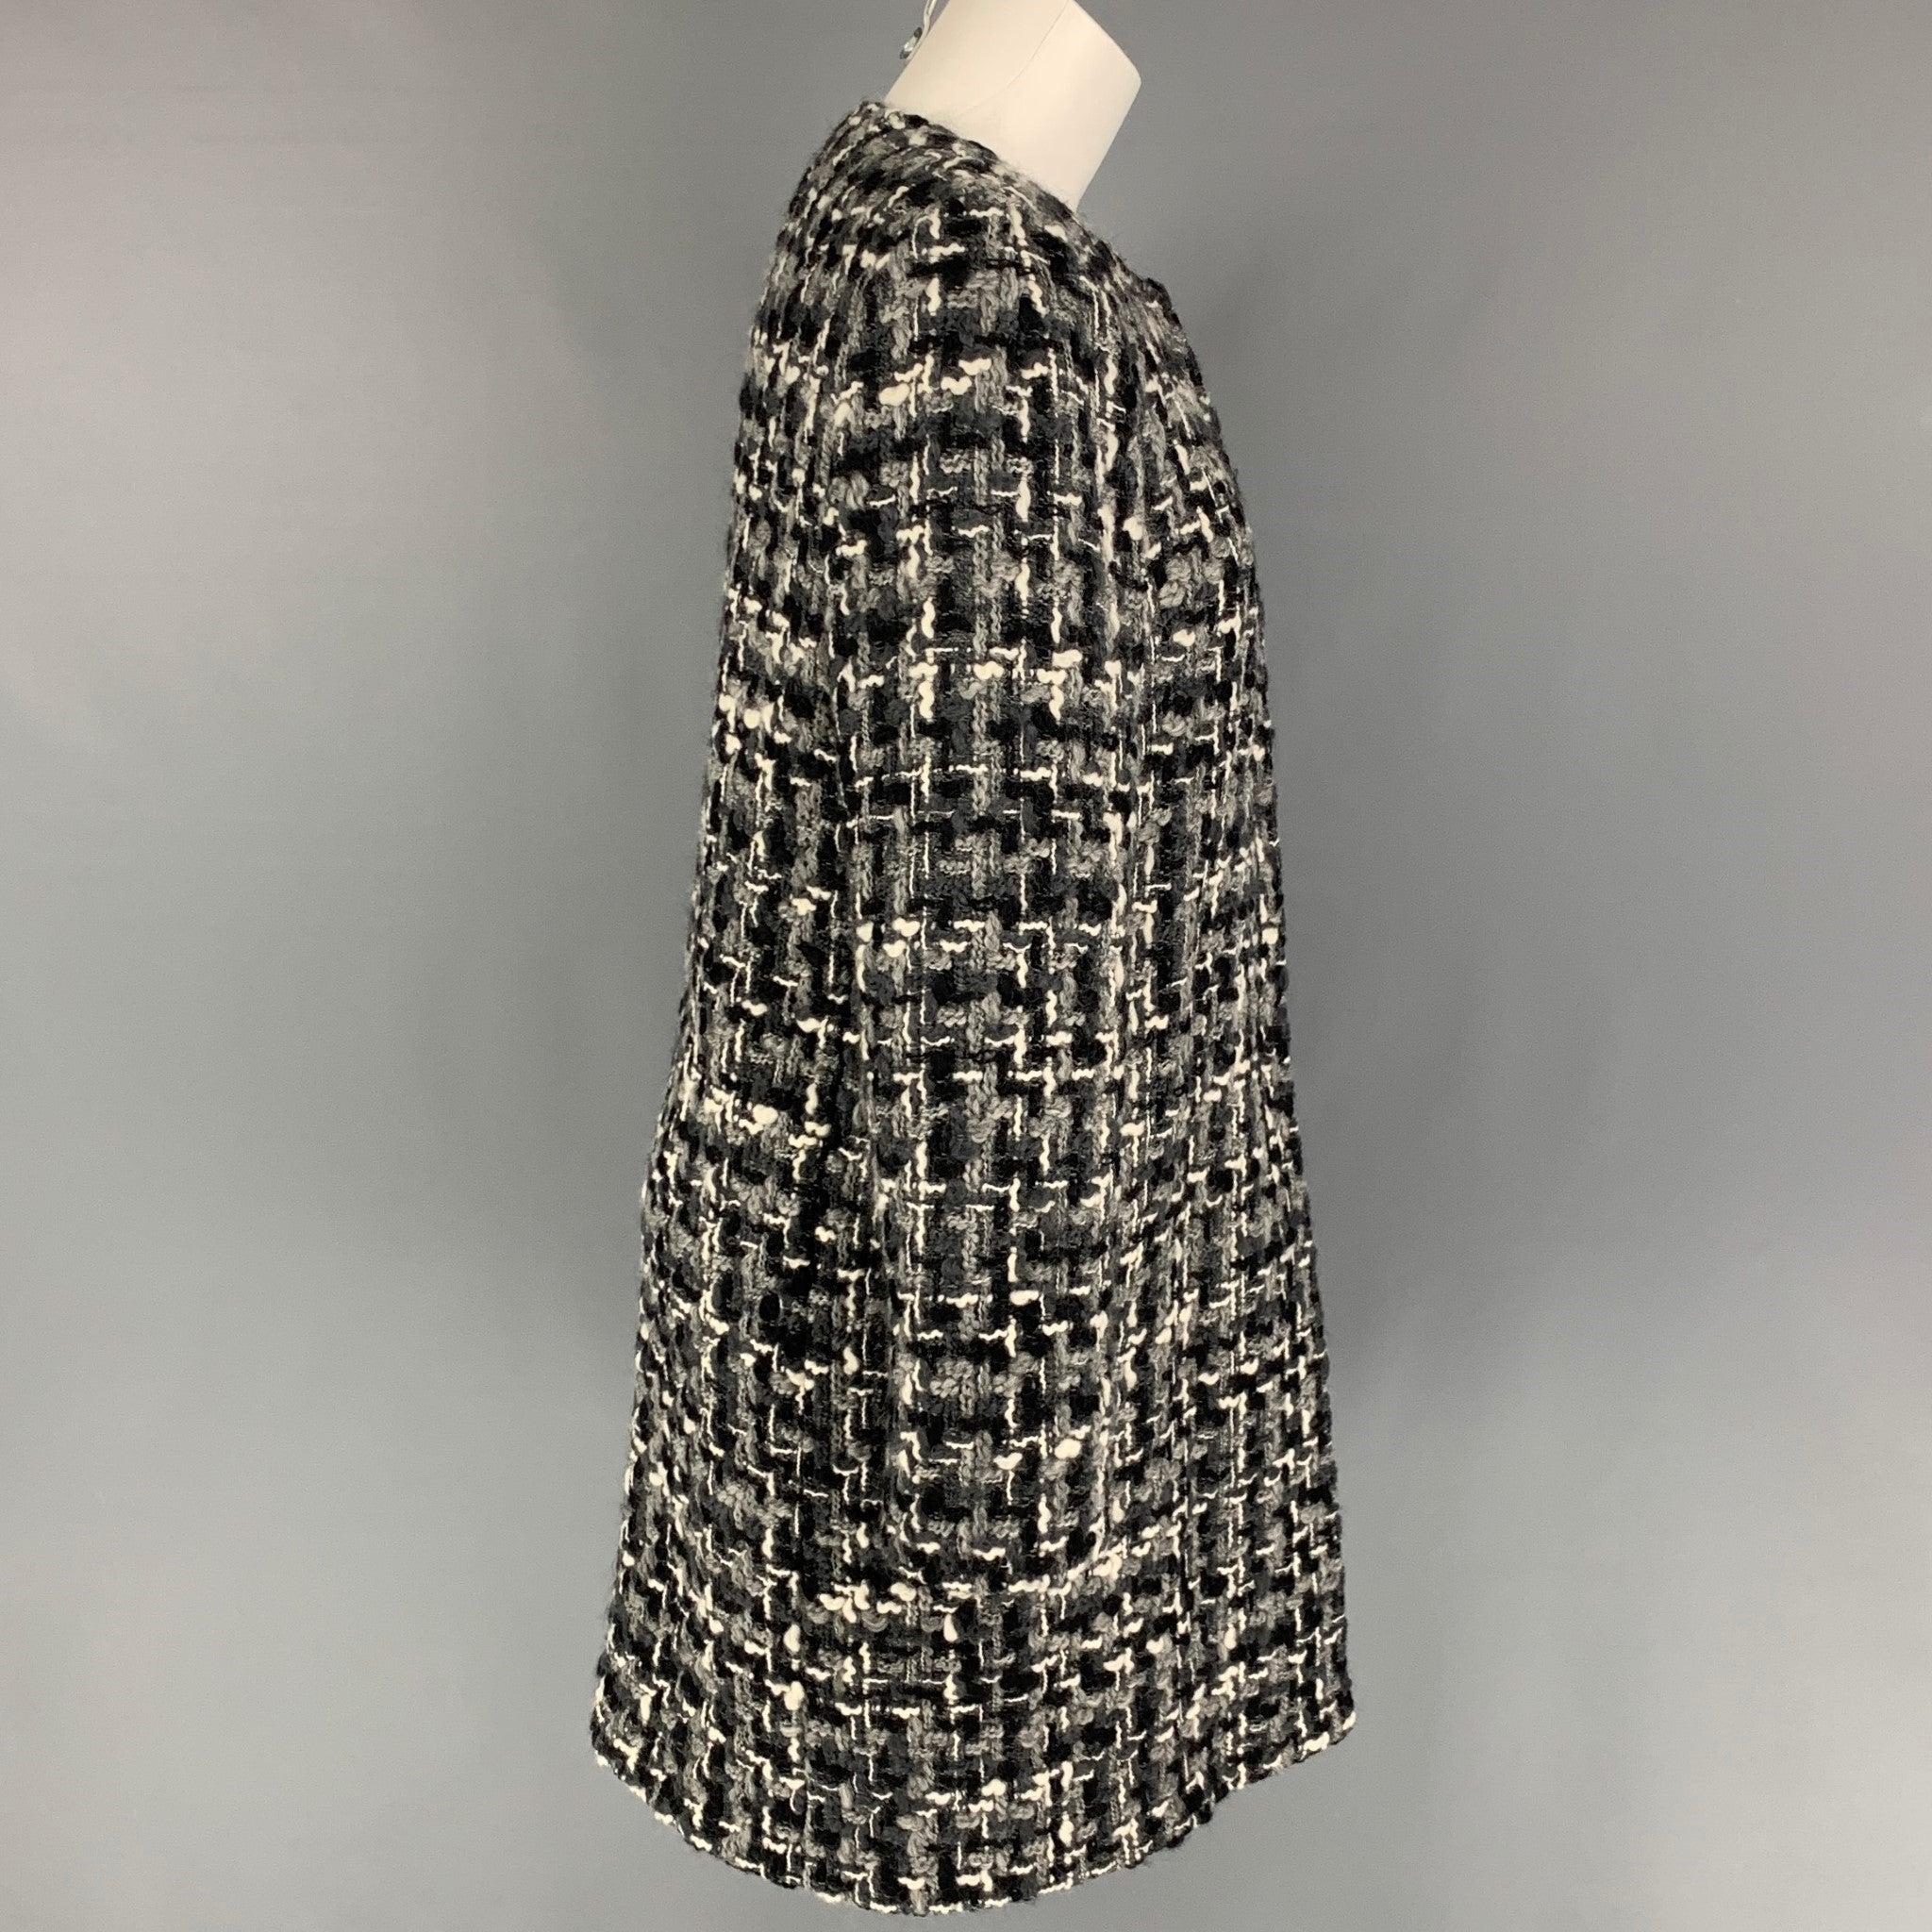 DOLCE & GABBANA coat comes in a black & white tweed wool blend featuring a collarless style, slit pockets, and a hidden placket closure. Made in Italy.
Very Good
Pre-Owned Condition. 

Marked:   38 

Measurements: 
 
Shoulder: 14.5 inches  Bust: 37